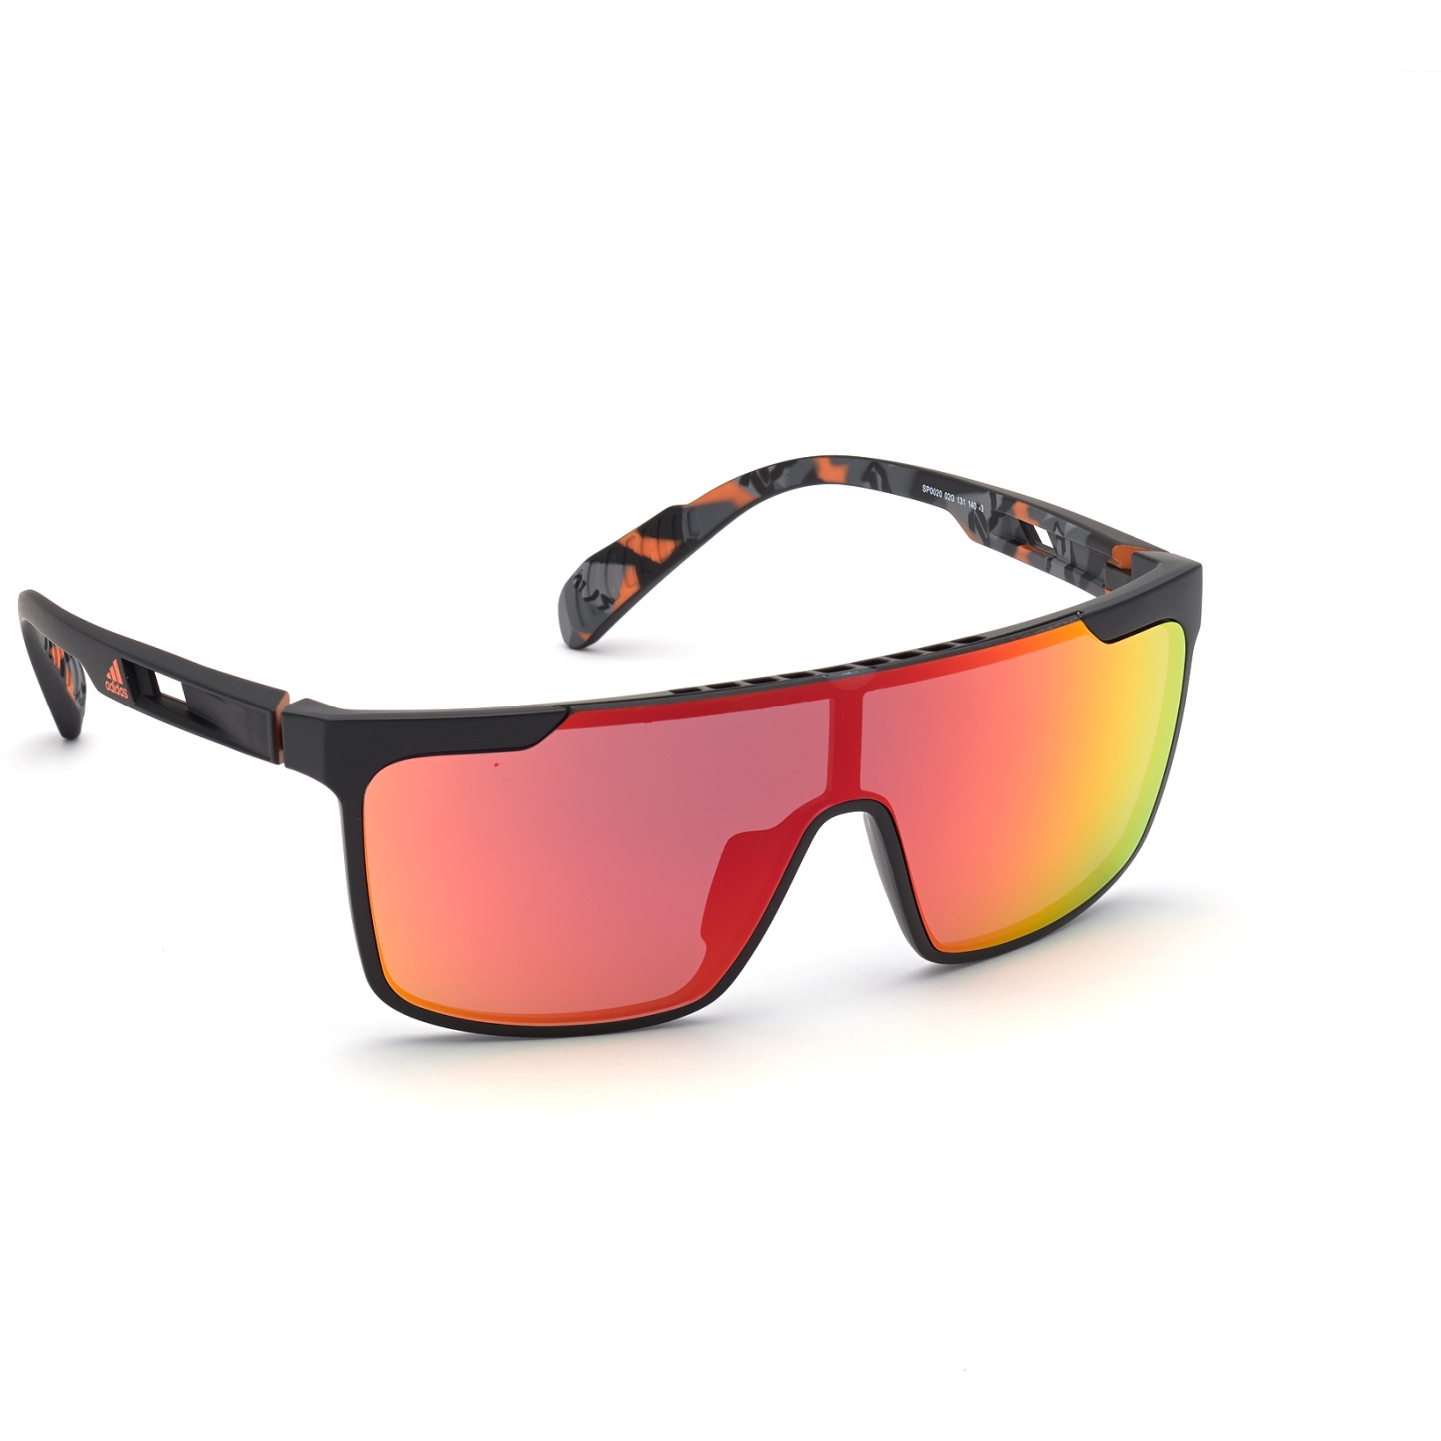 Picture of adidas Sp0020 Injected Sport Sunglasses - Matte Black/Orange Camo / Contrast Mirror Red